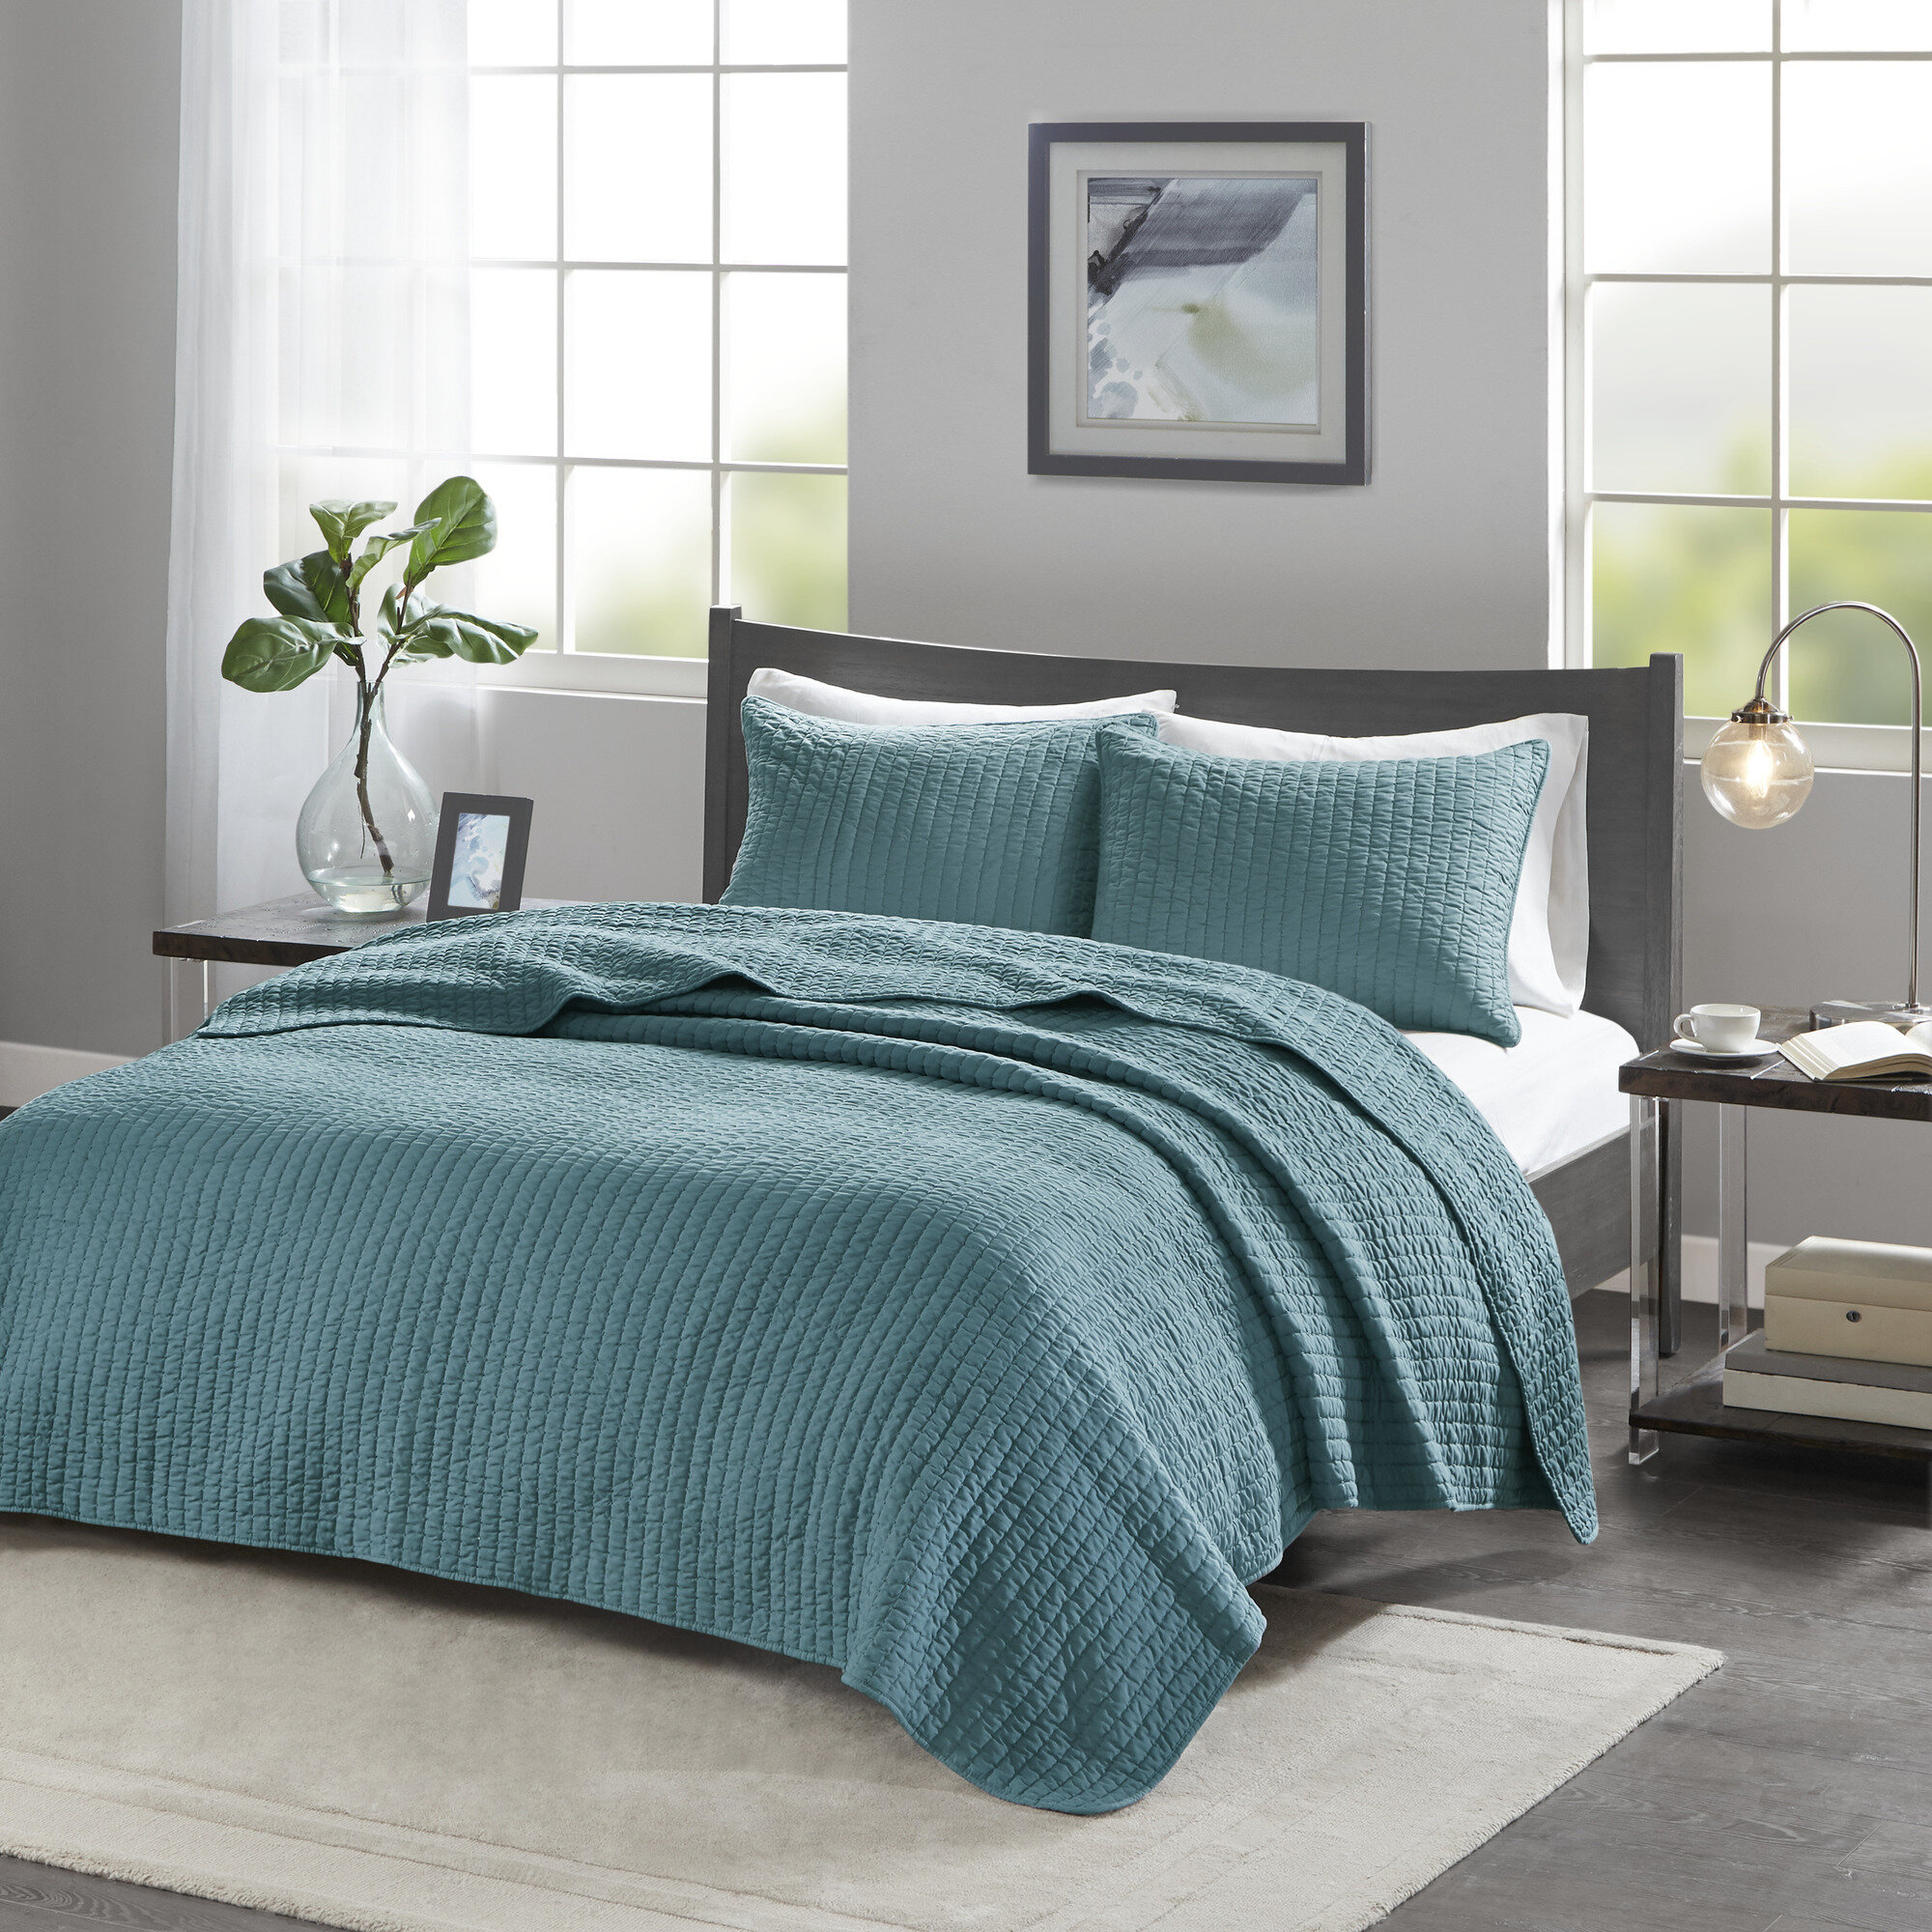 Teal Quilts Coverlets Sets Free Shipping Over 35 Wayfair